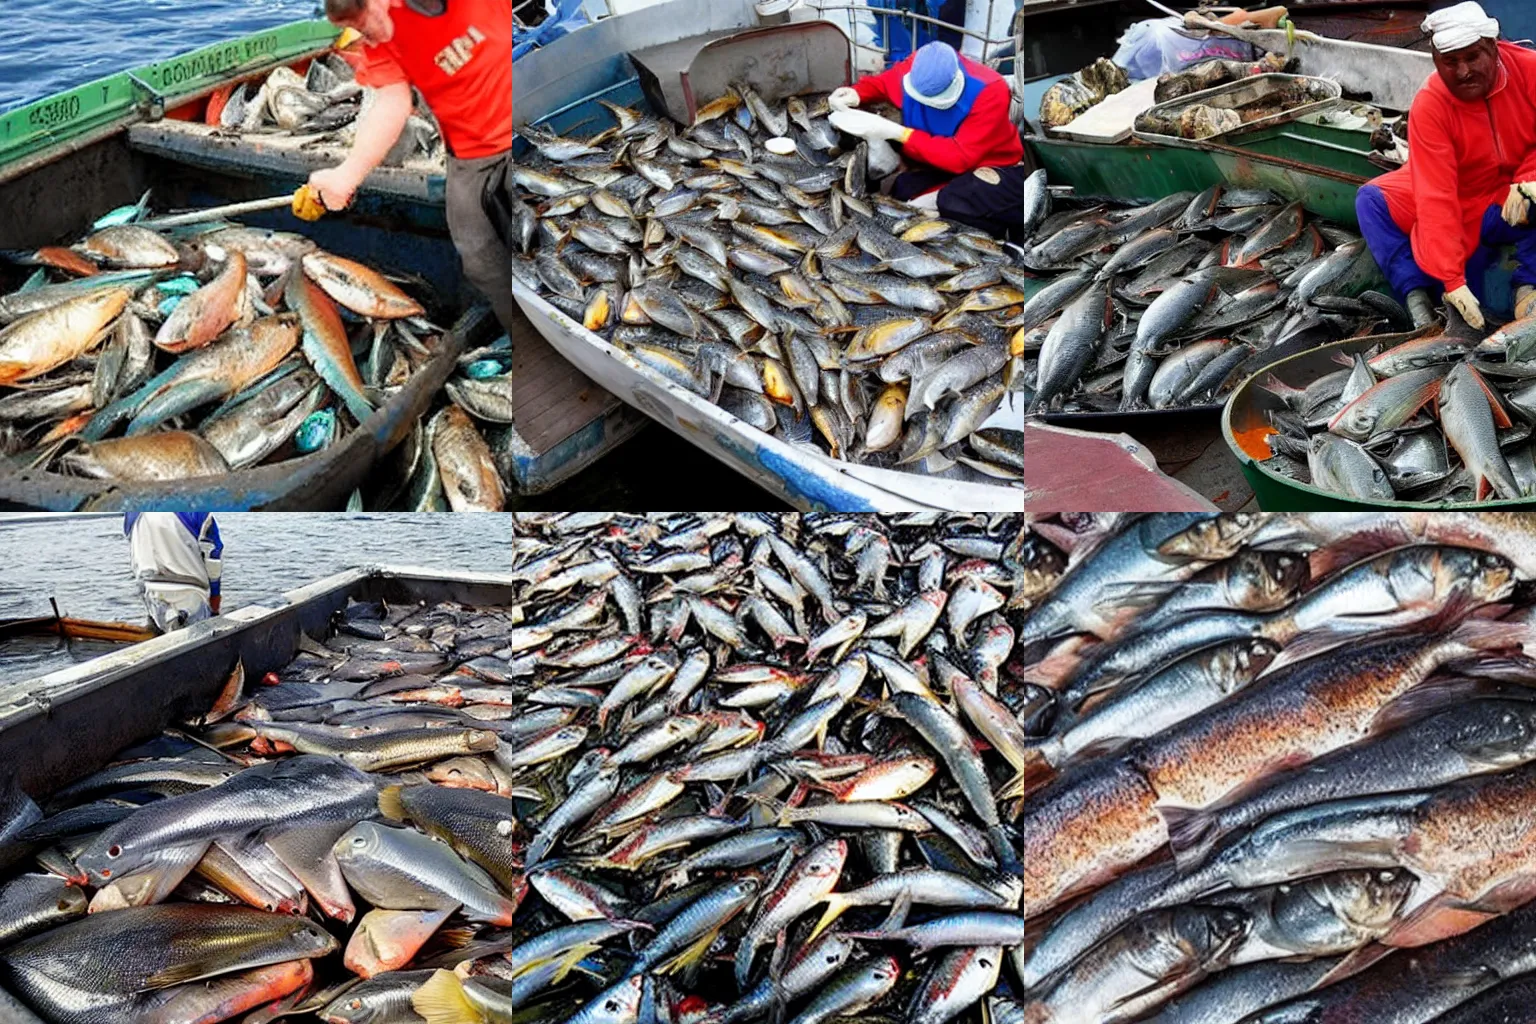 Prompt: 17,000 tonnes of fish discards